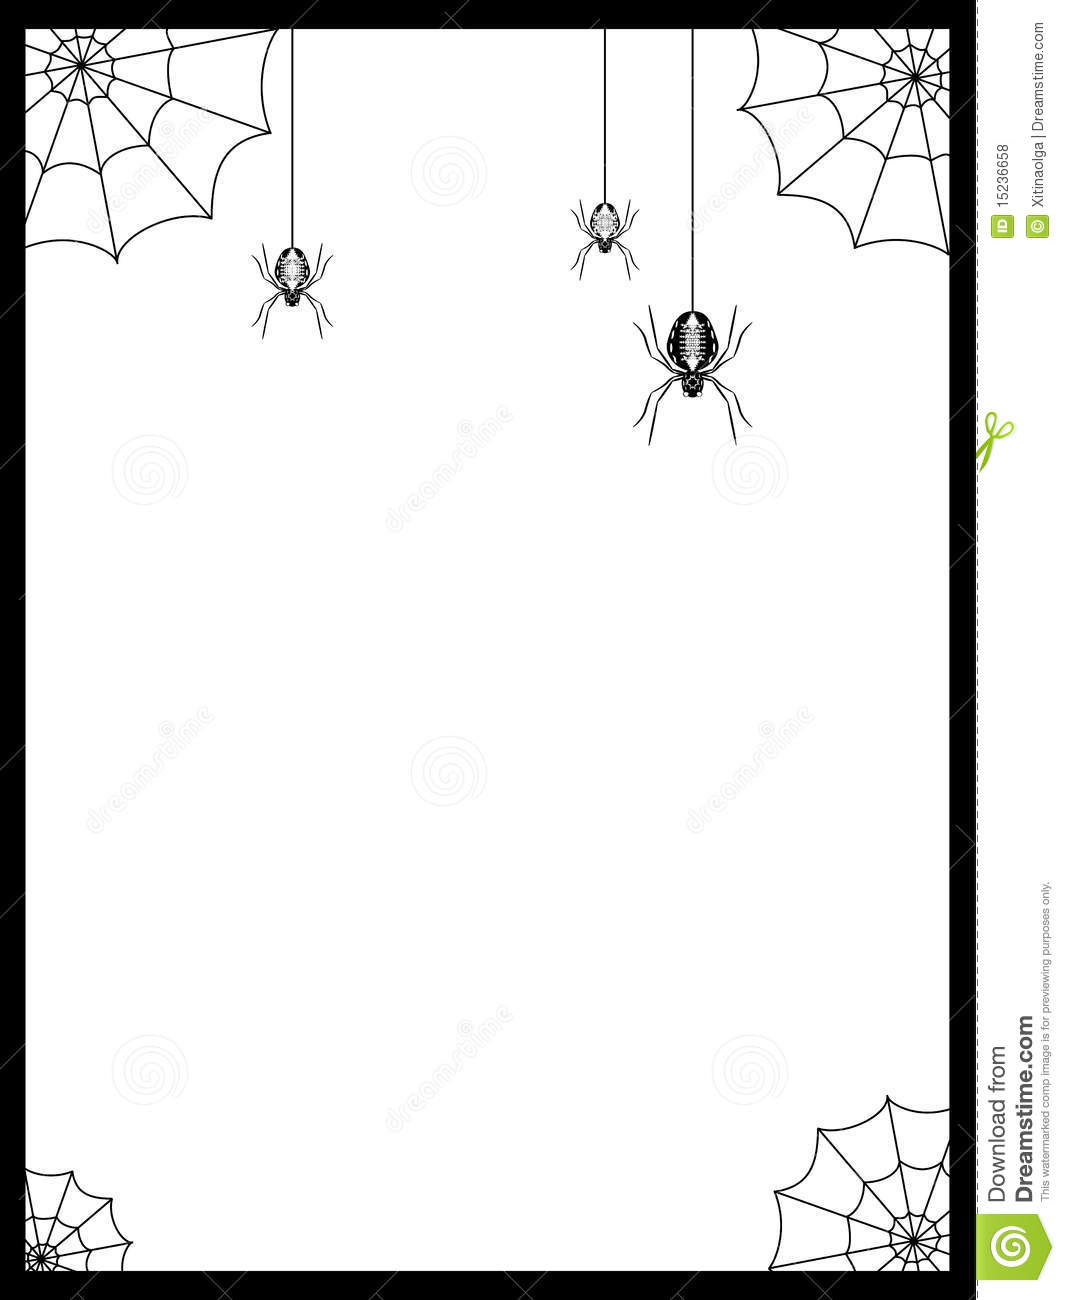     With Three Spiders And Web Royalty Free Stock Photos   Image  15236658